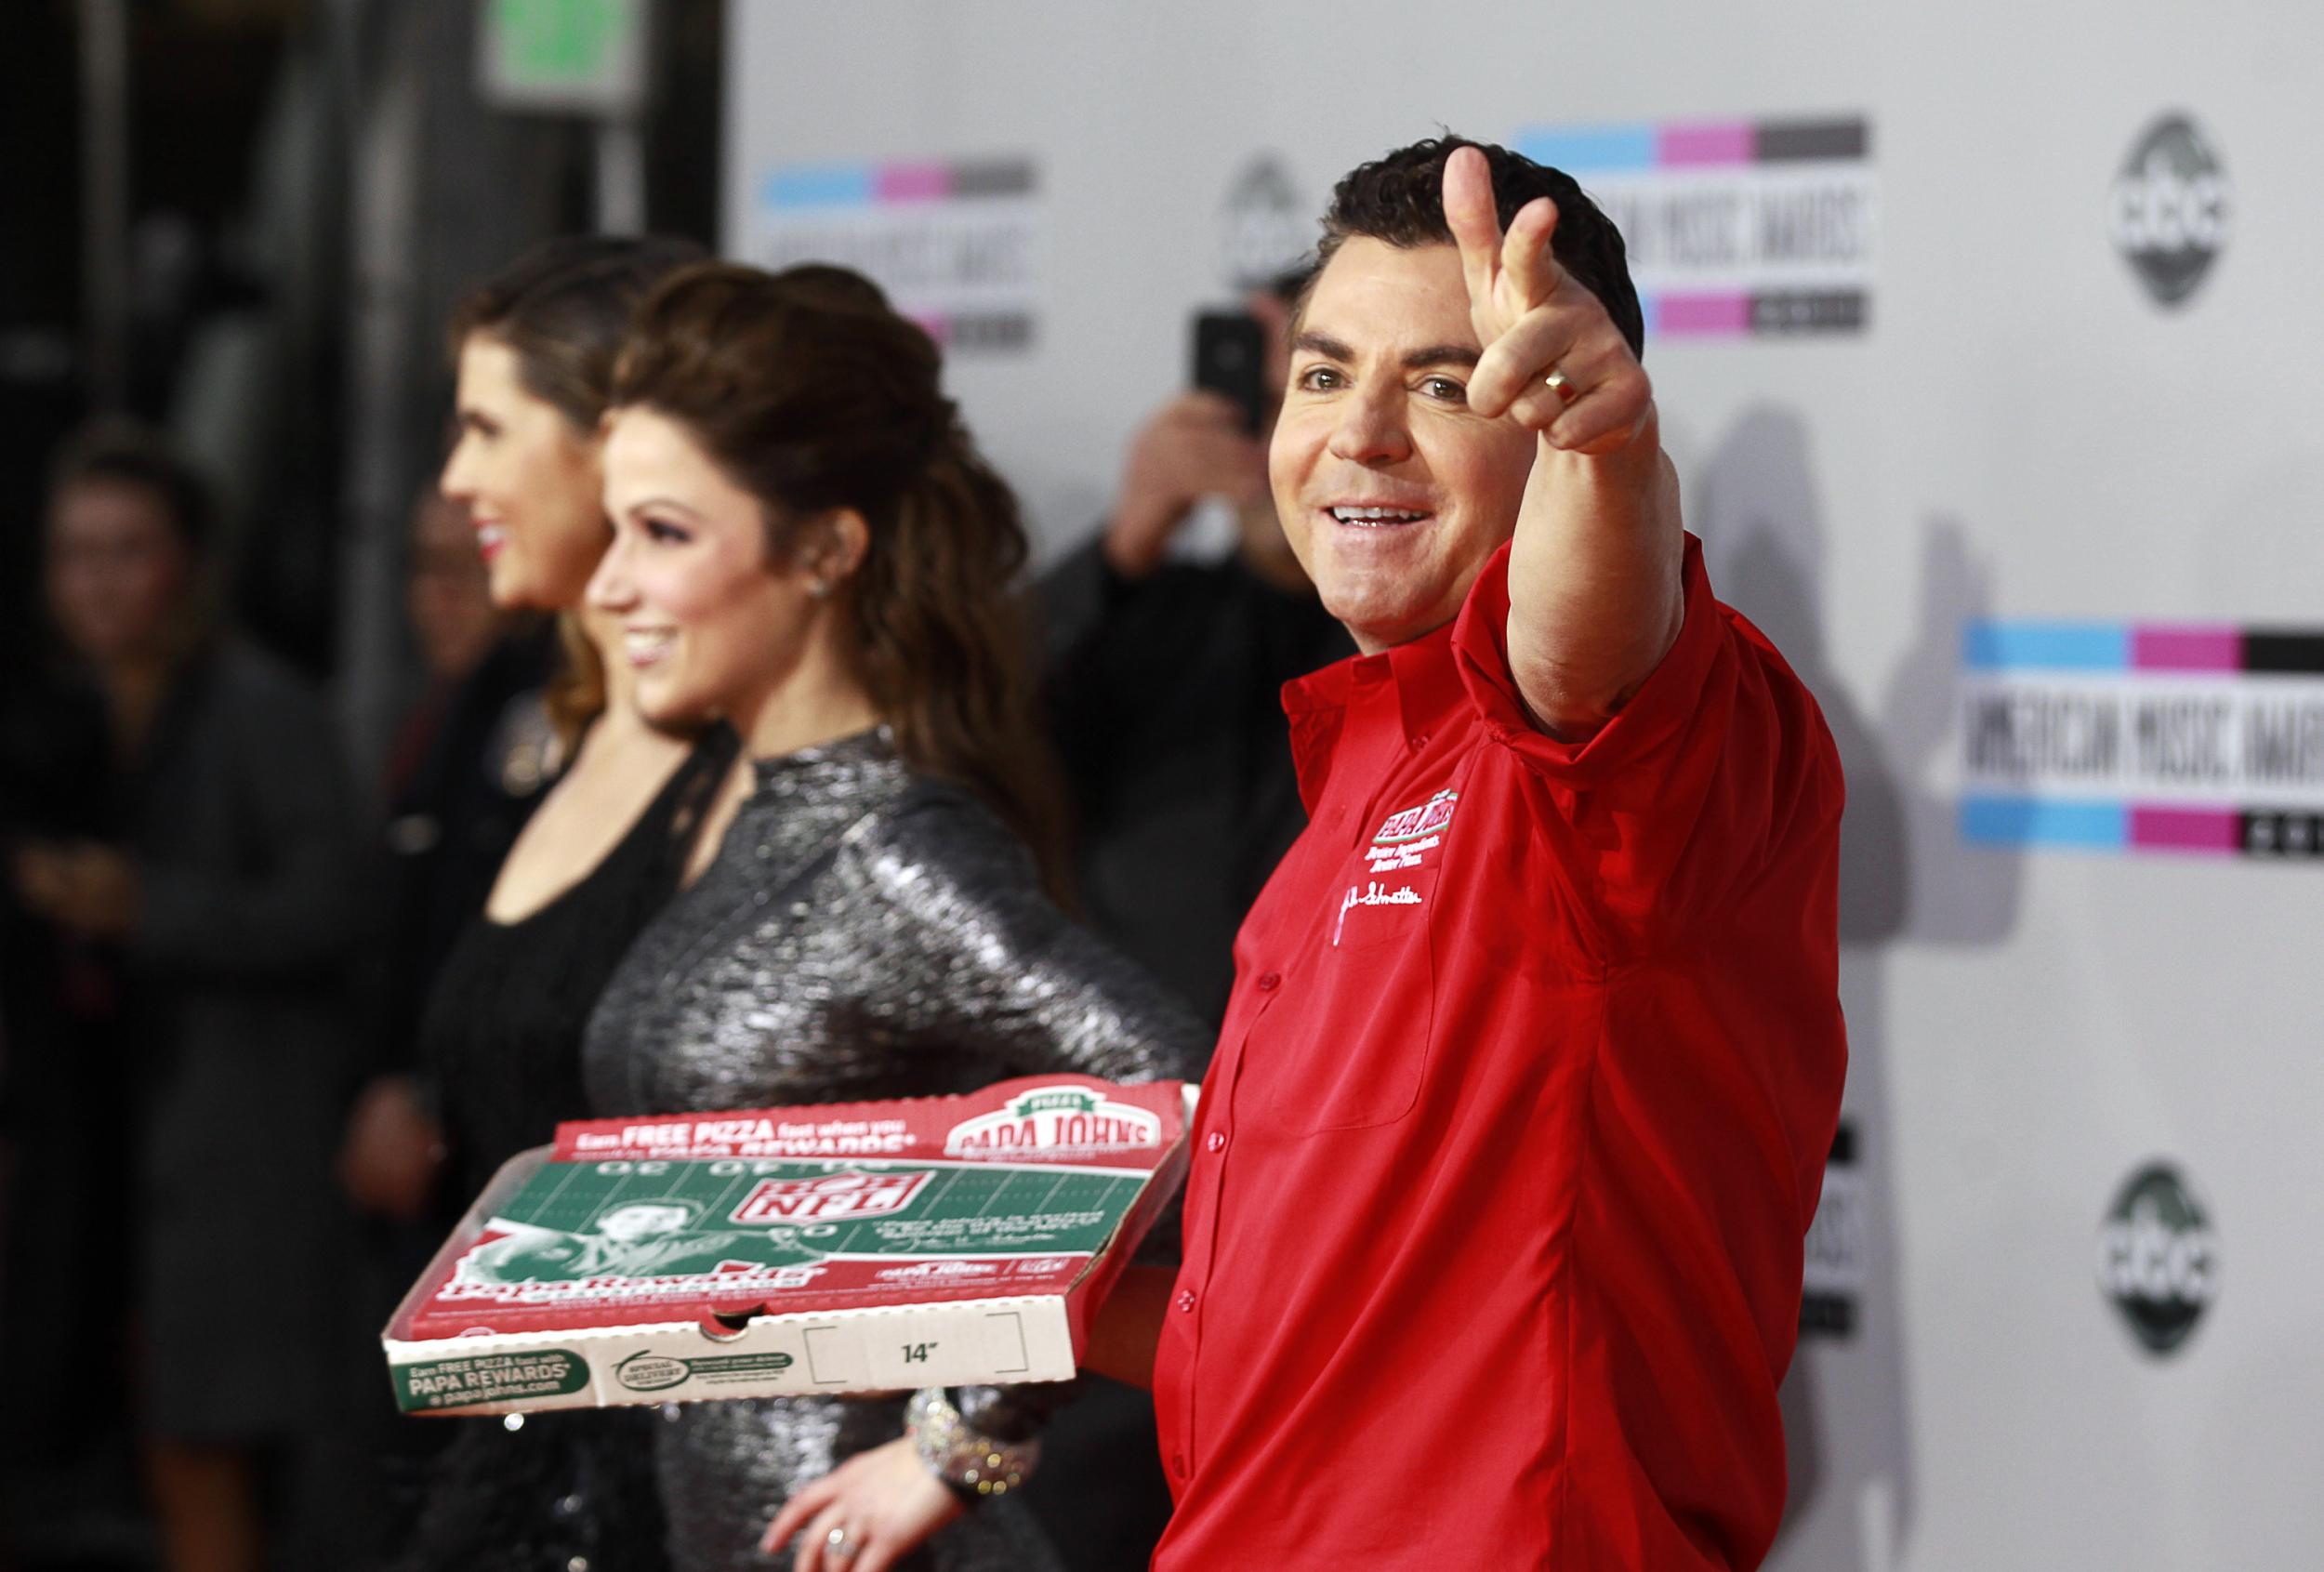 Schnatter founded Papa John's in 1984